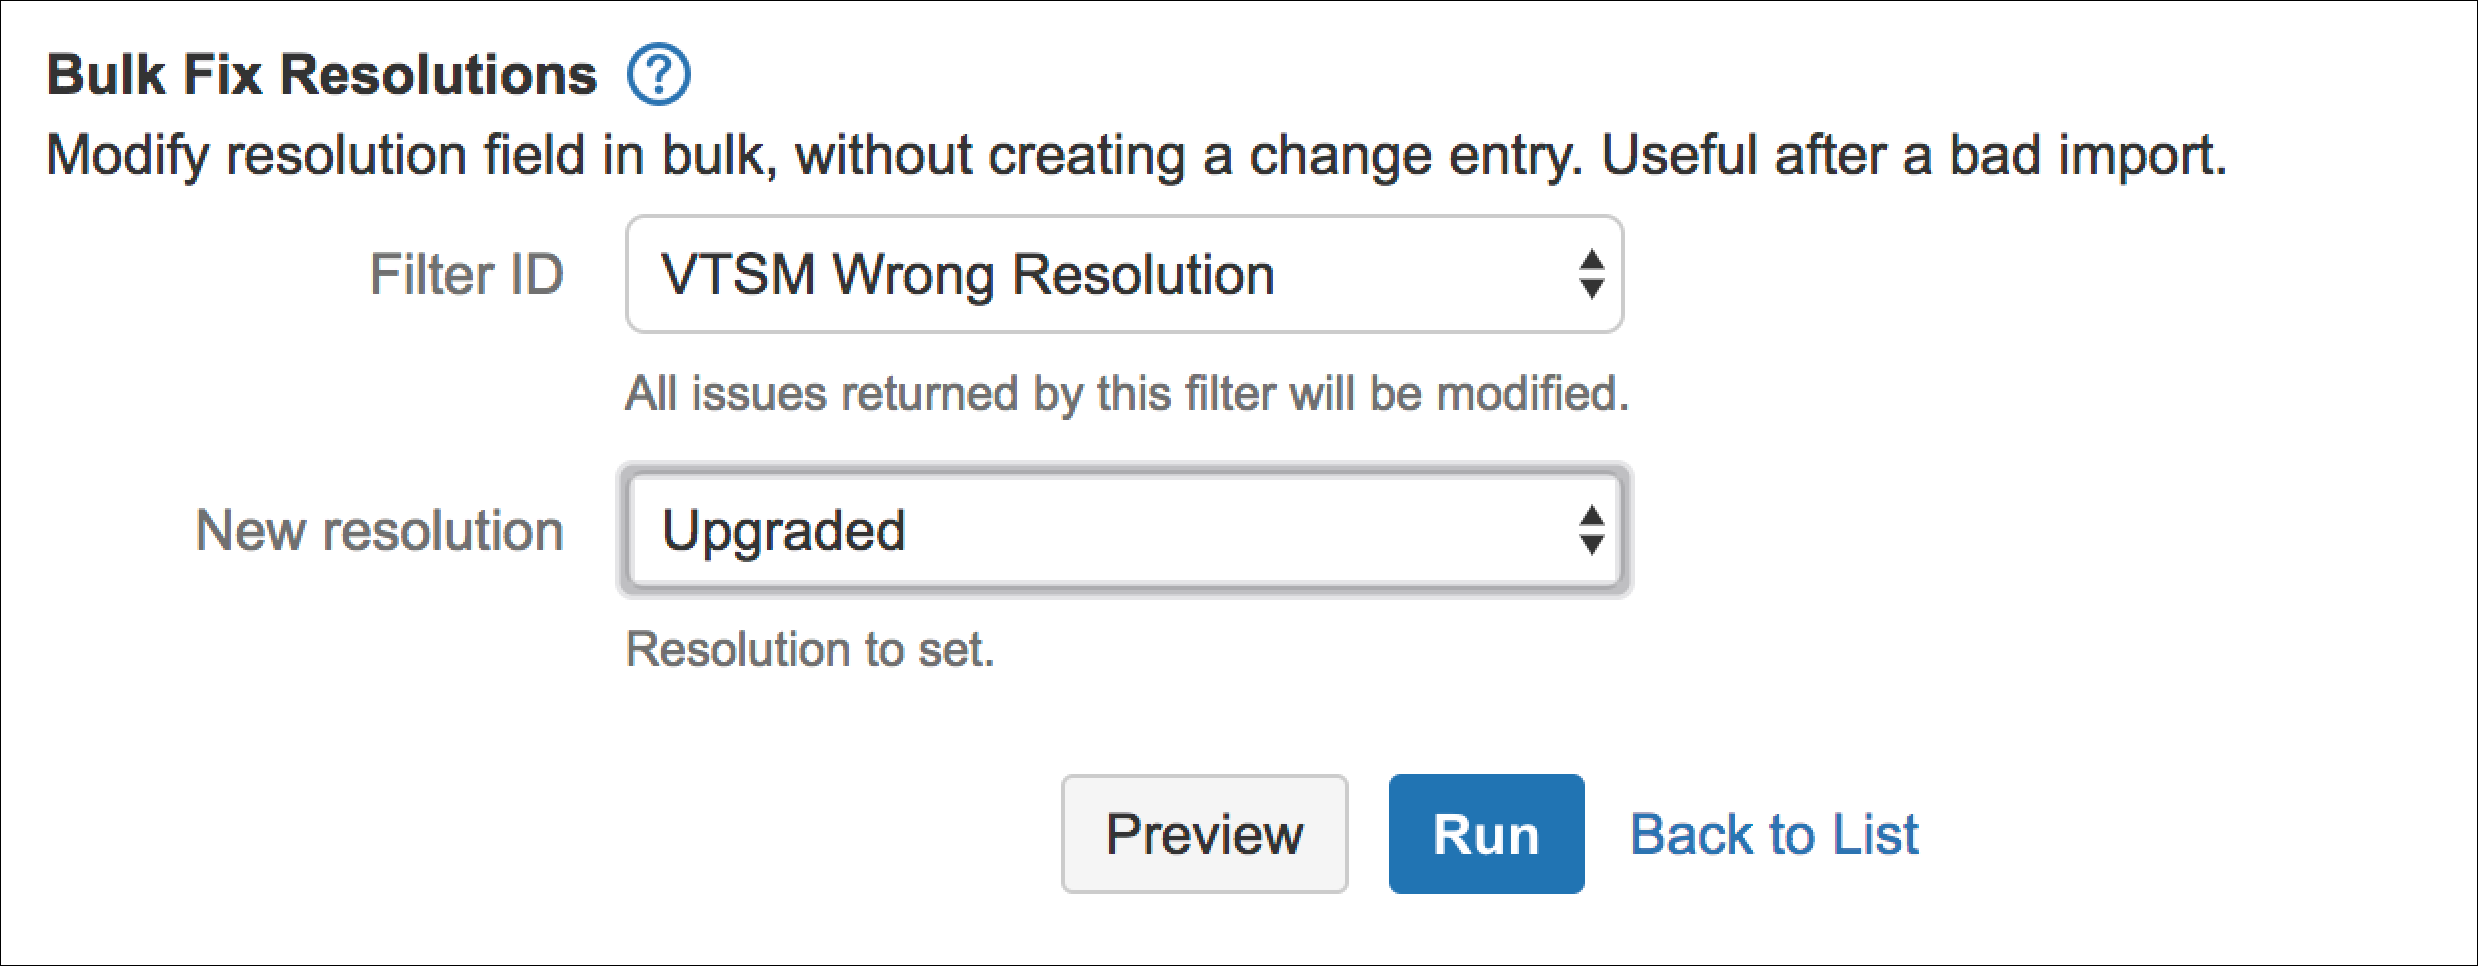 The Bulk Fix Resolutions screen with example configuration.